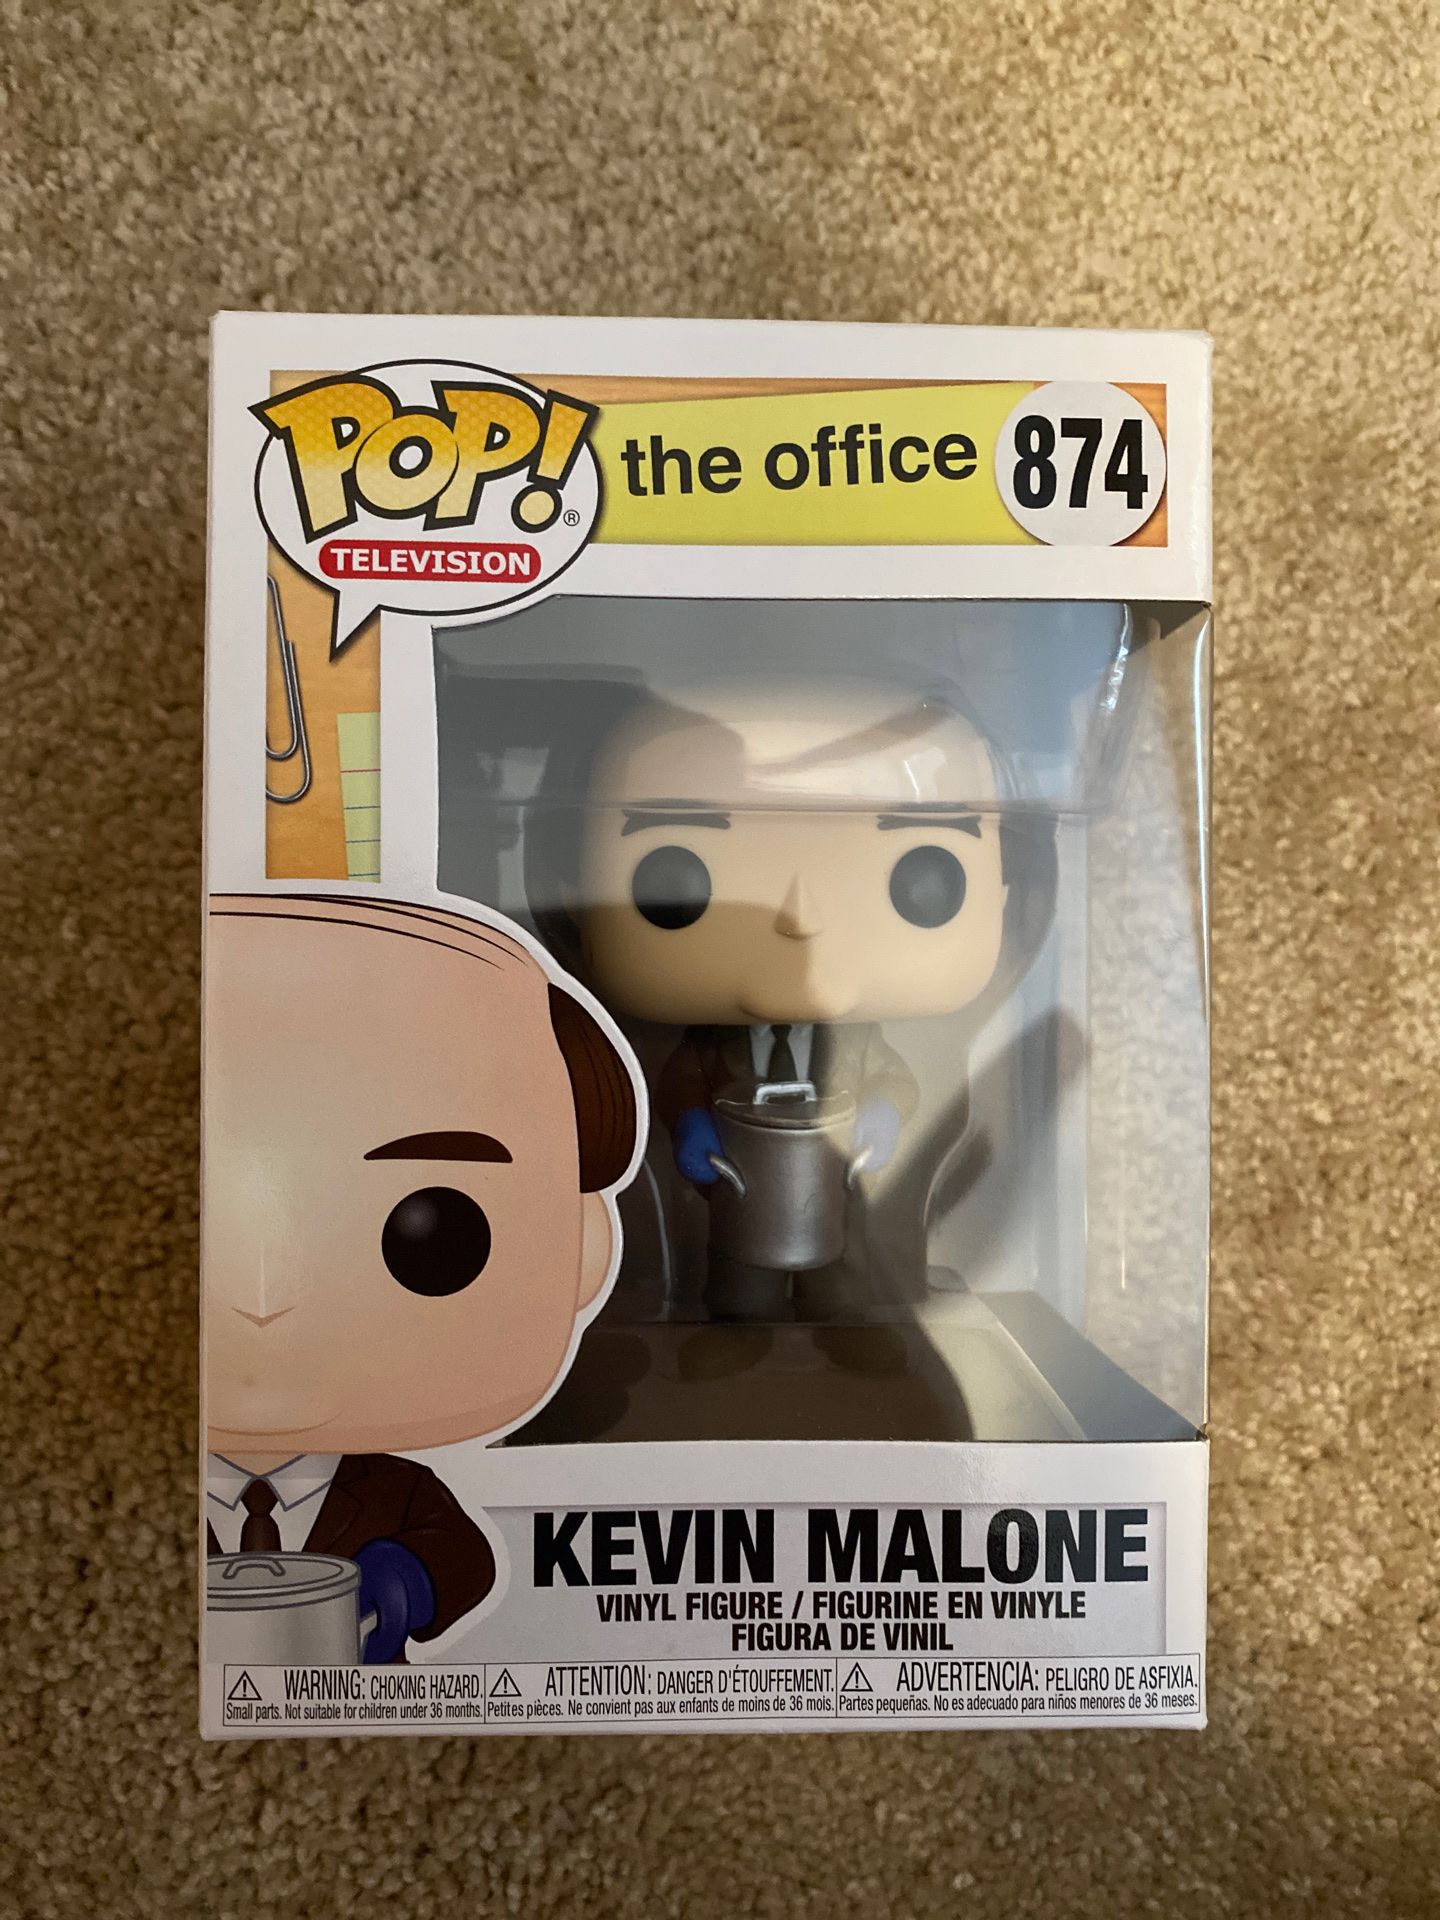 Pop! Television Kevin Malone The office